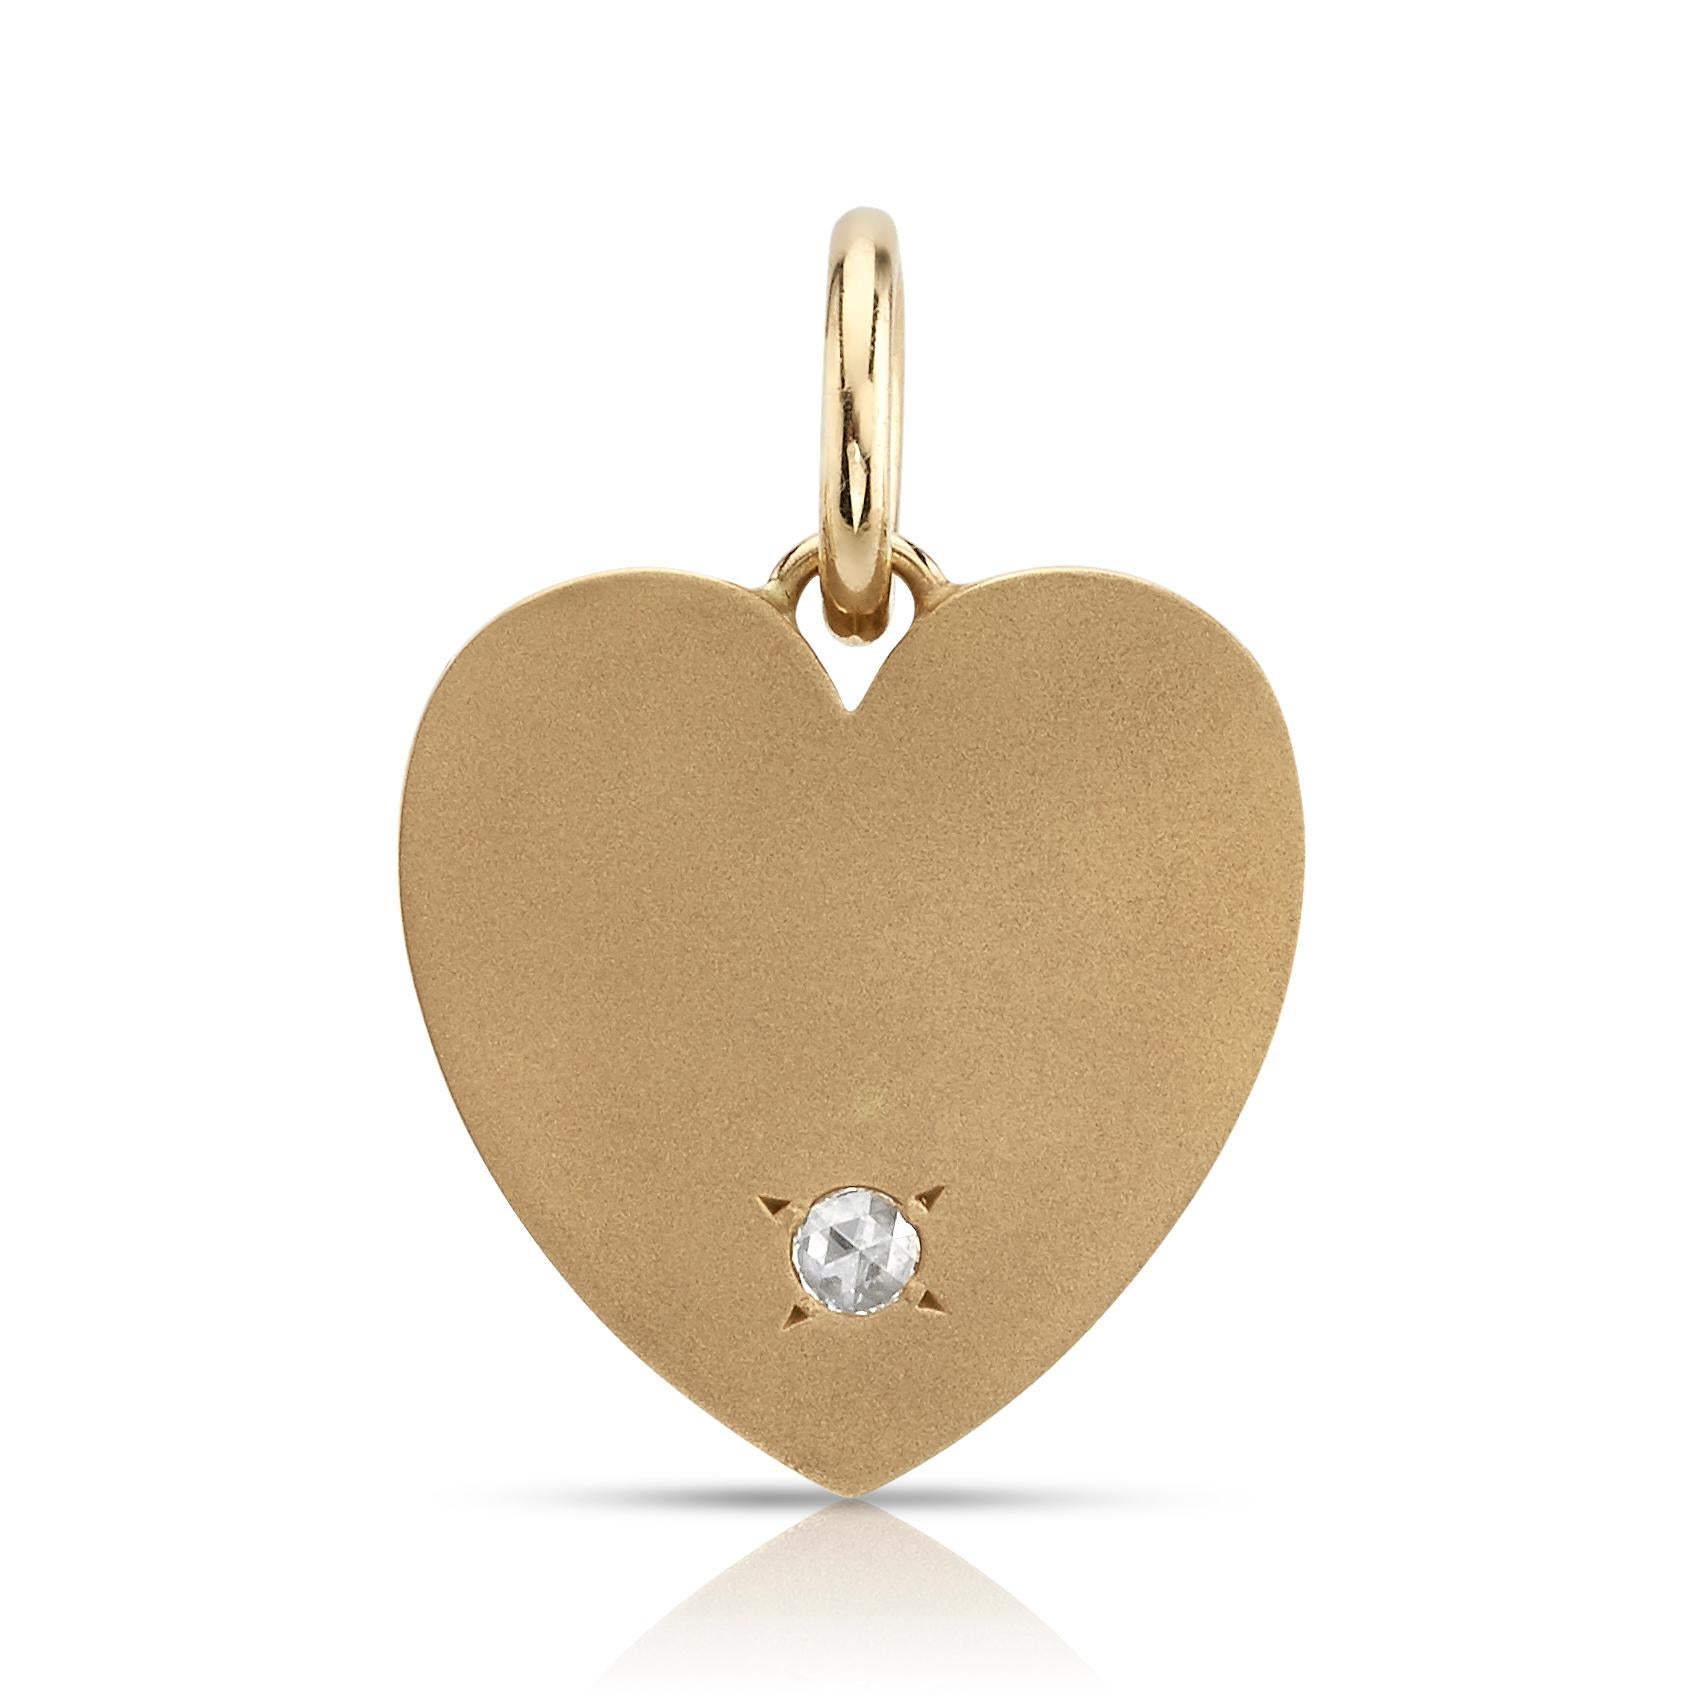 0.08ct H/SI Rose cut diamond set in a handcrafted polished 18K yellow gold heart shaped pendant. Charm measures 22mm x21mm across. Available in a brushed or polished finish. Please specify when ordering.

Price does not include chain.

Our jewelry